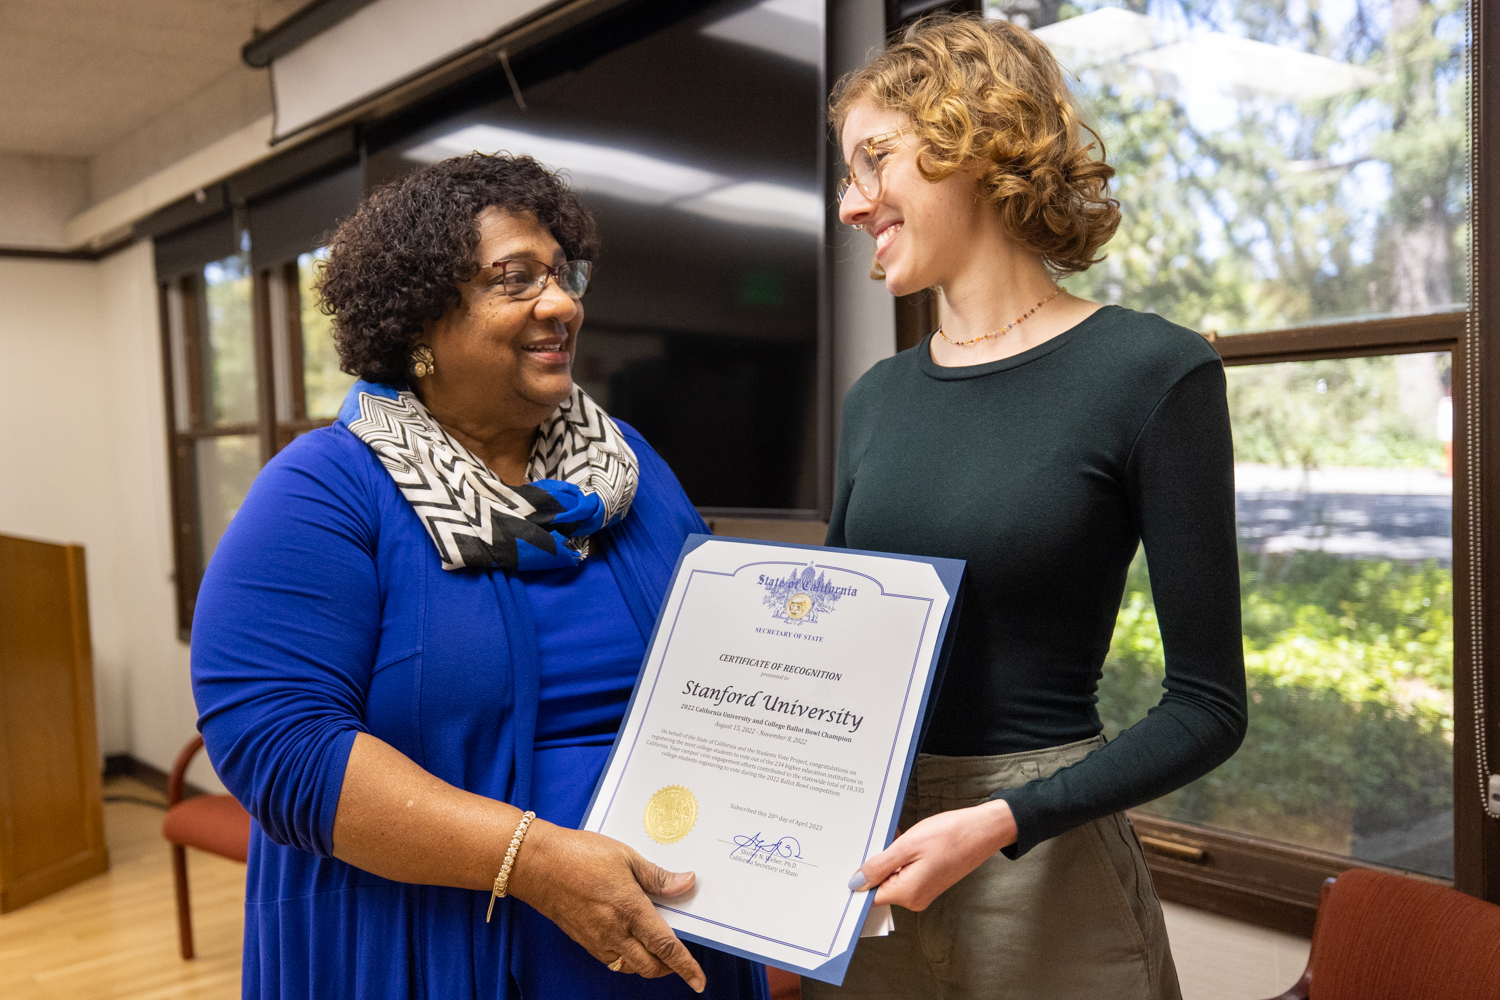 Shirley N. Weber, Ph.D., California Secretary of State (left), presenting the Ballot Bowl certificate to Cameron Lange, a StanfordVotes student leader (right), accepting the award.